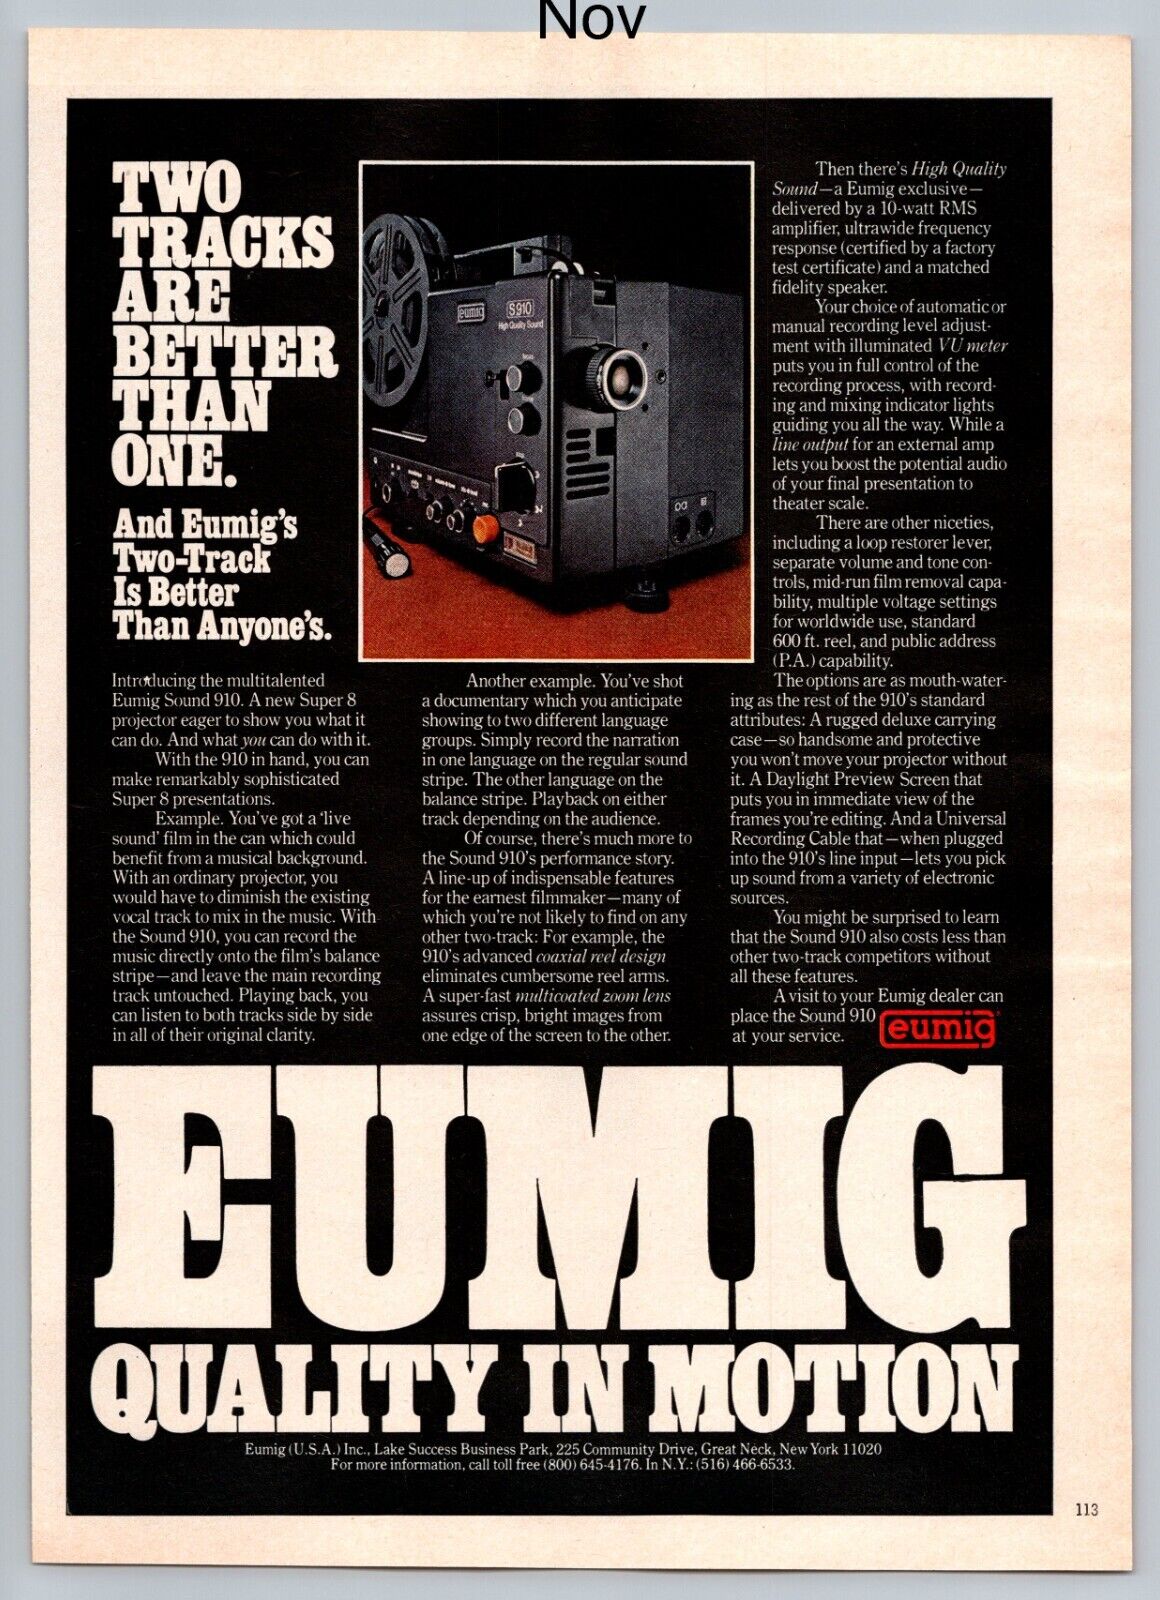 Eumig Sound 910 Super 8 Projector Promo Vintage 1978 Full Page Print Ad